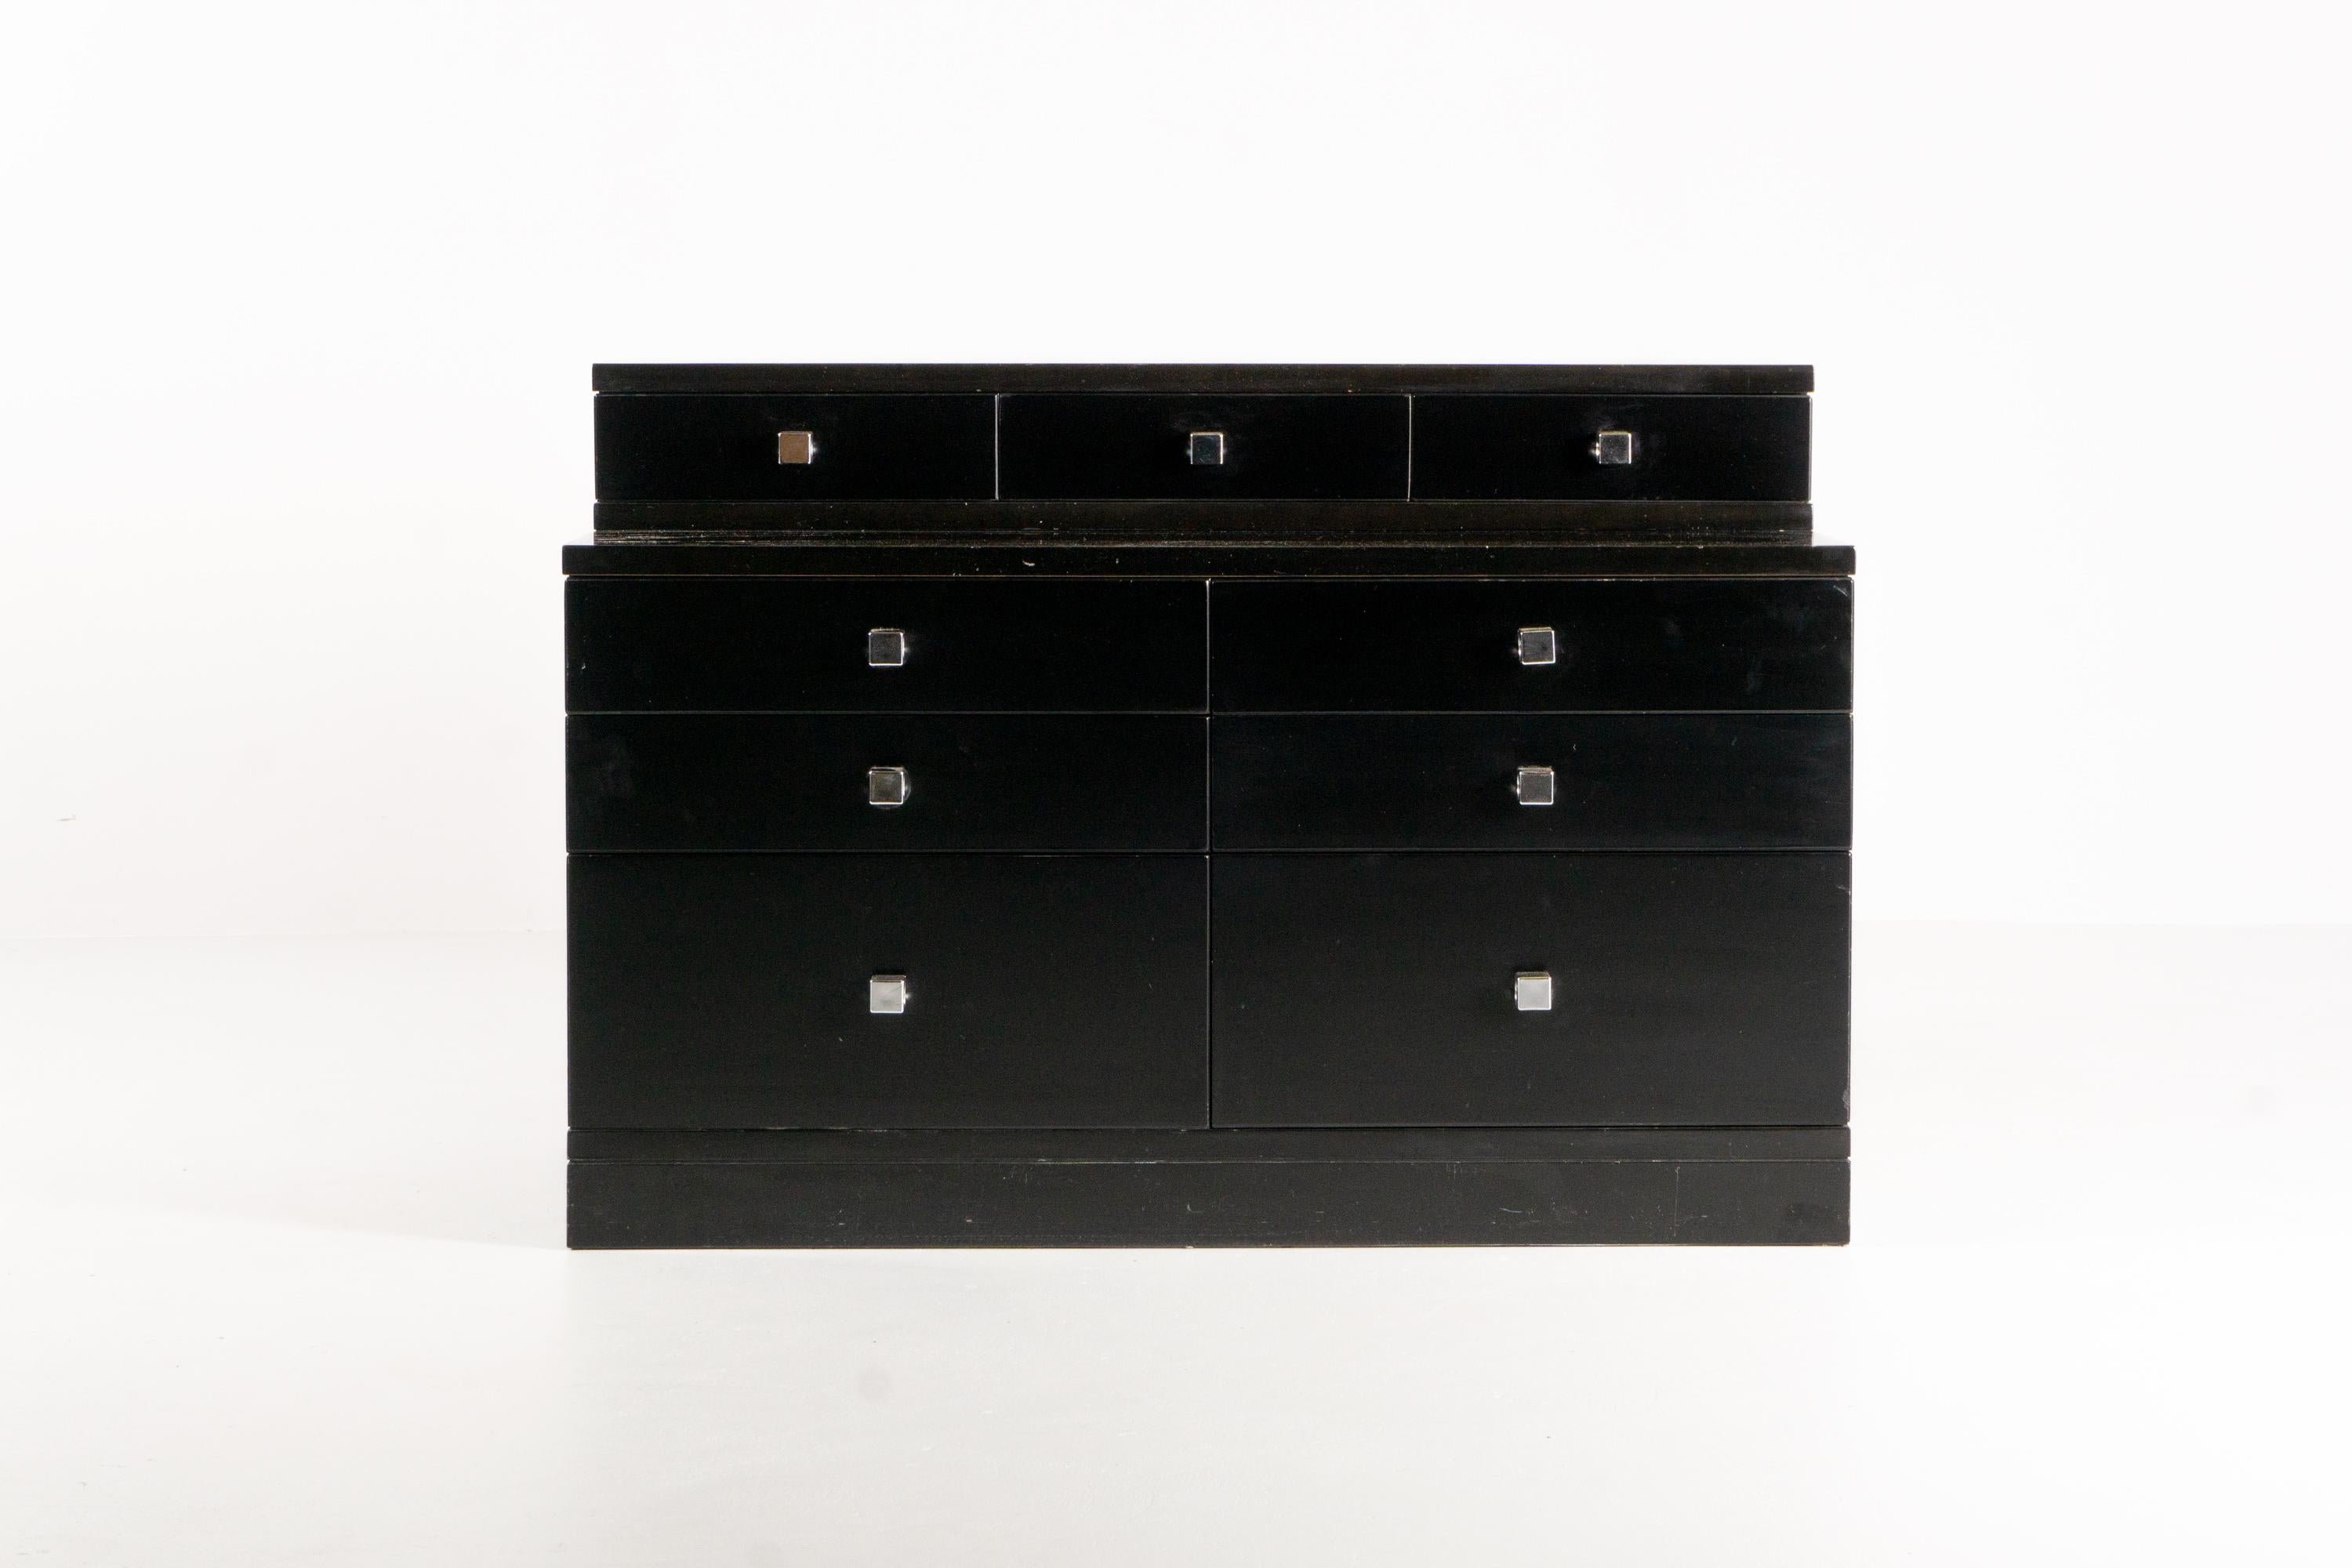 This extraordinary drawer cabinet in black lacquered wood was designed by architect and designer Ico Parisi around 1970. The nine drawers of different sizes are equipped with rectangular handles made of metal.
This exceptional piece of furniture